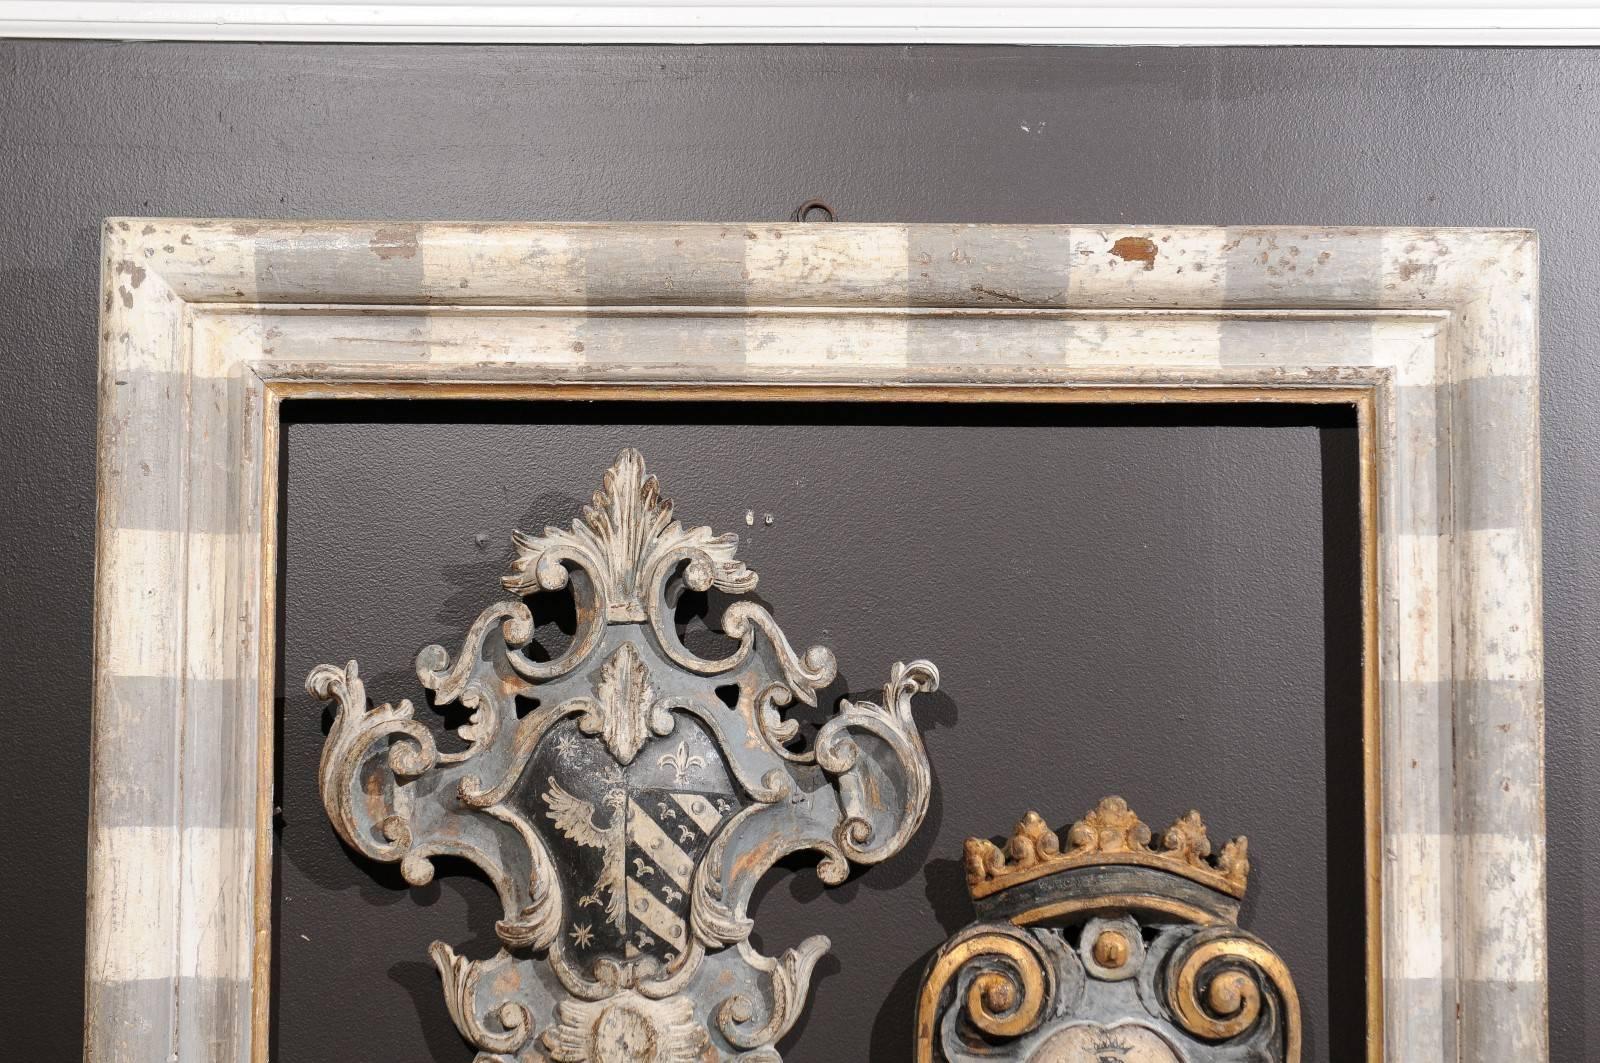 19th Century  Italian Large Scale Grey and White Painted Frame with Gilt Accents - 1 Availabl